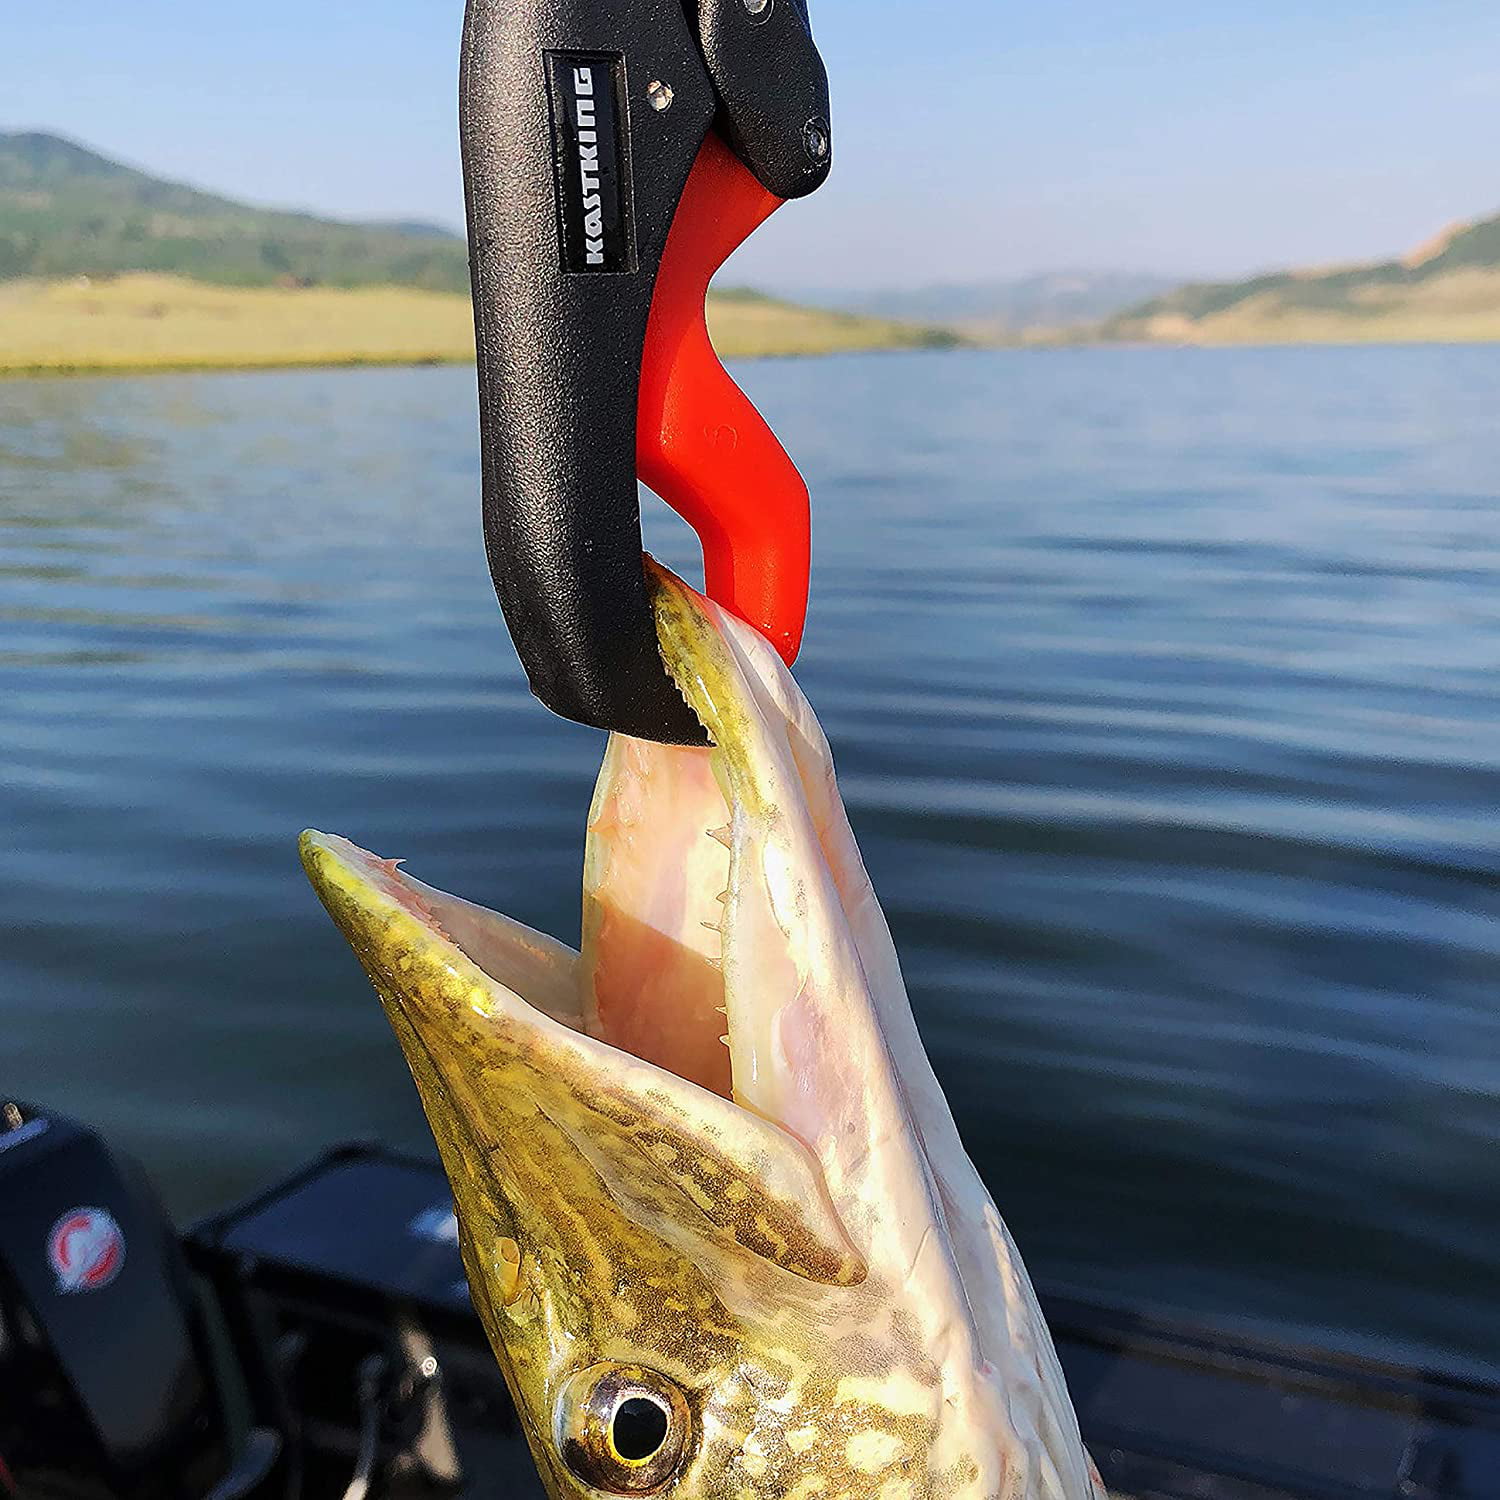 Waterproof Floating Digital Fishing Scale With No-Puncture Lip Gripper.  Dual Mode - Pounds/Ounces & Kilograms. Lightweight Abs Frame, Non-Slip  Handle. 